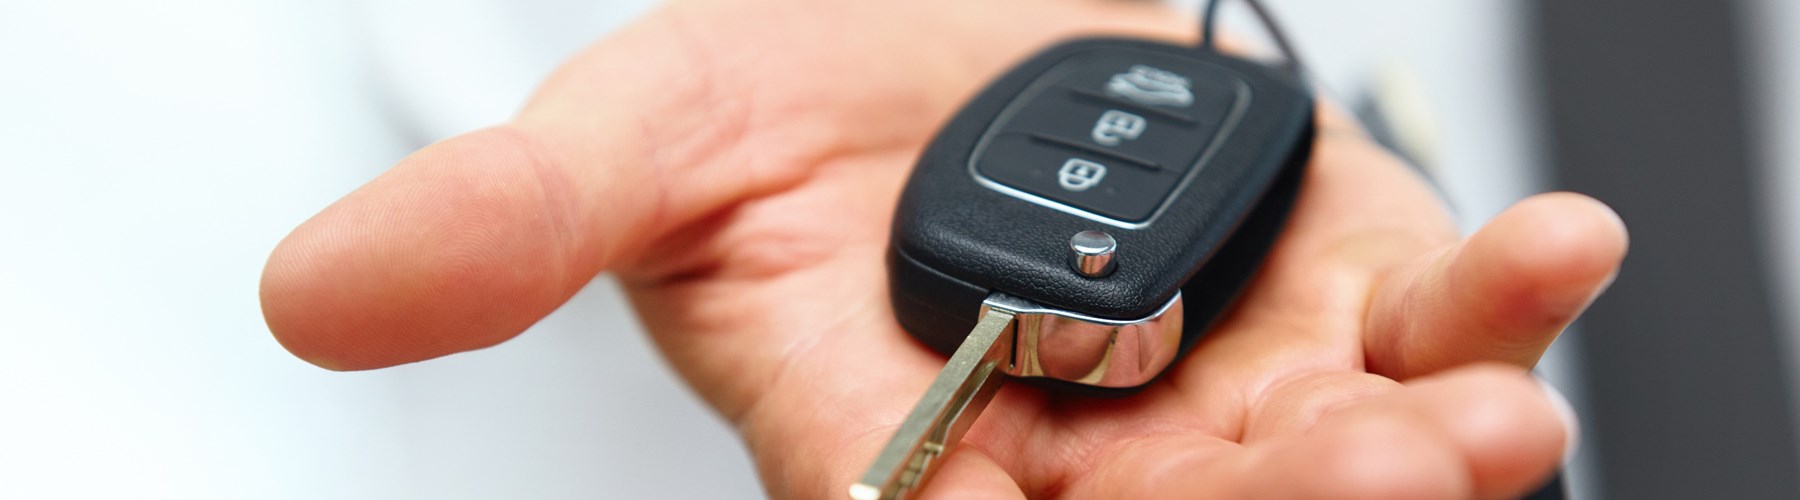 Hand holding an electric car key